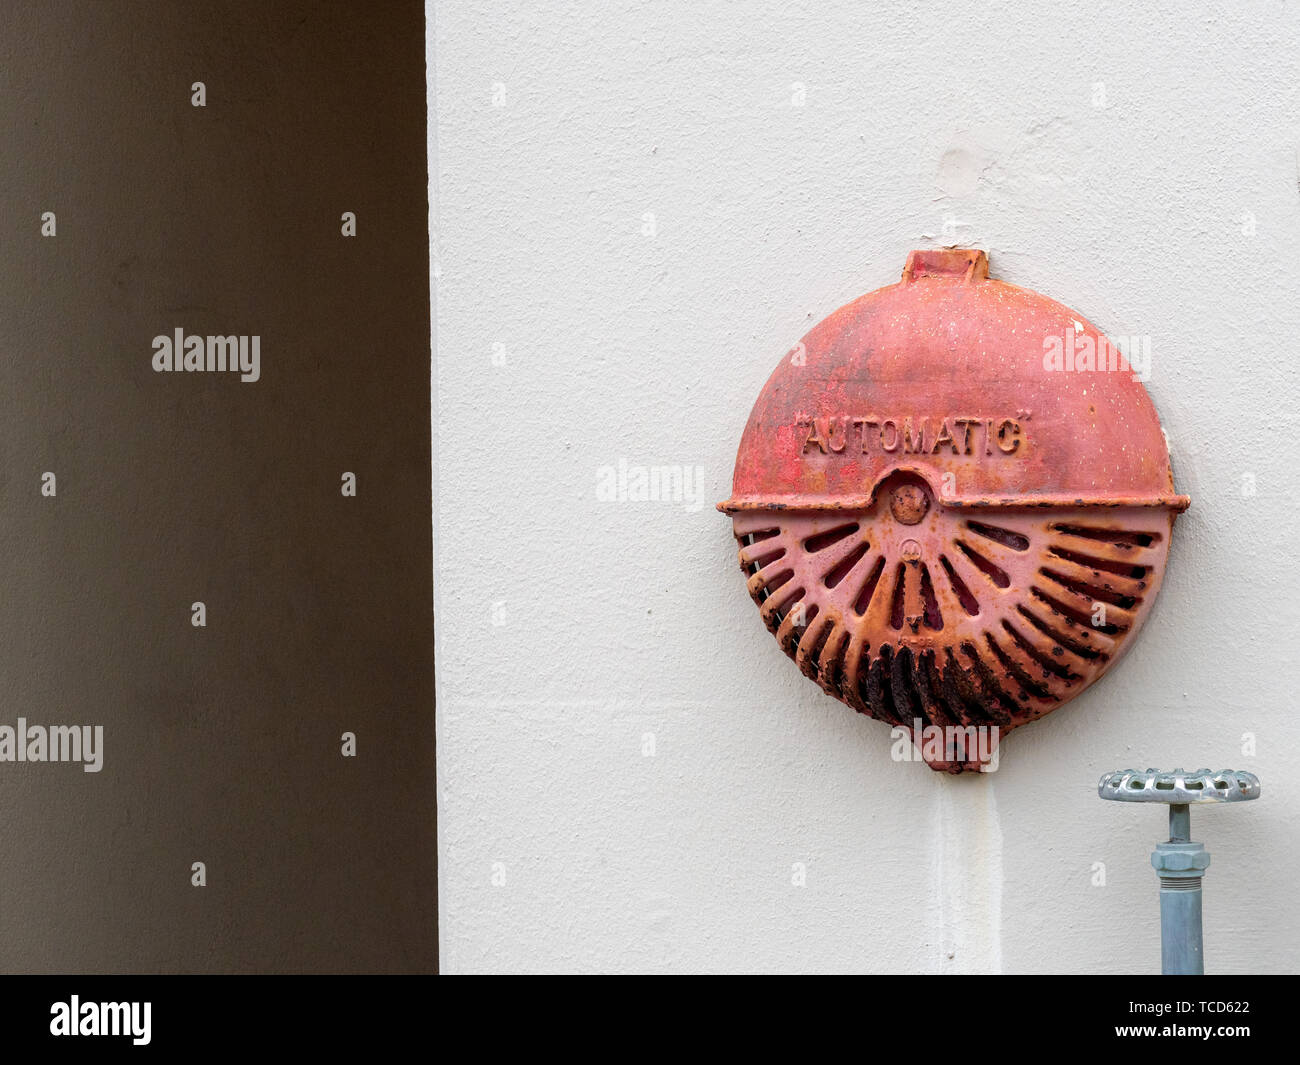 Automatic rusty old fire alarm bell hanging outside of industrial building Stock Photo